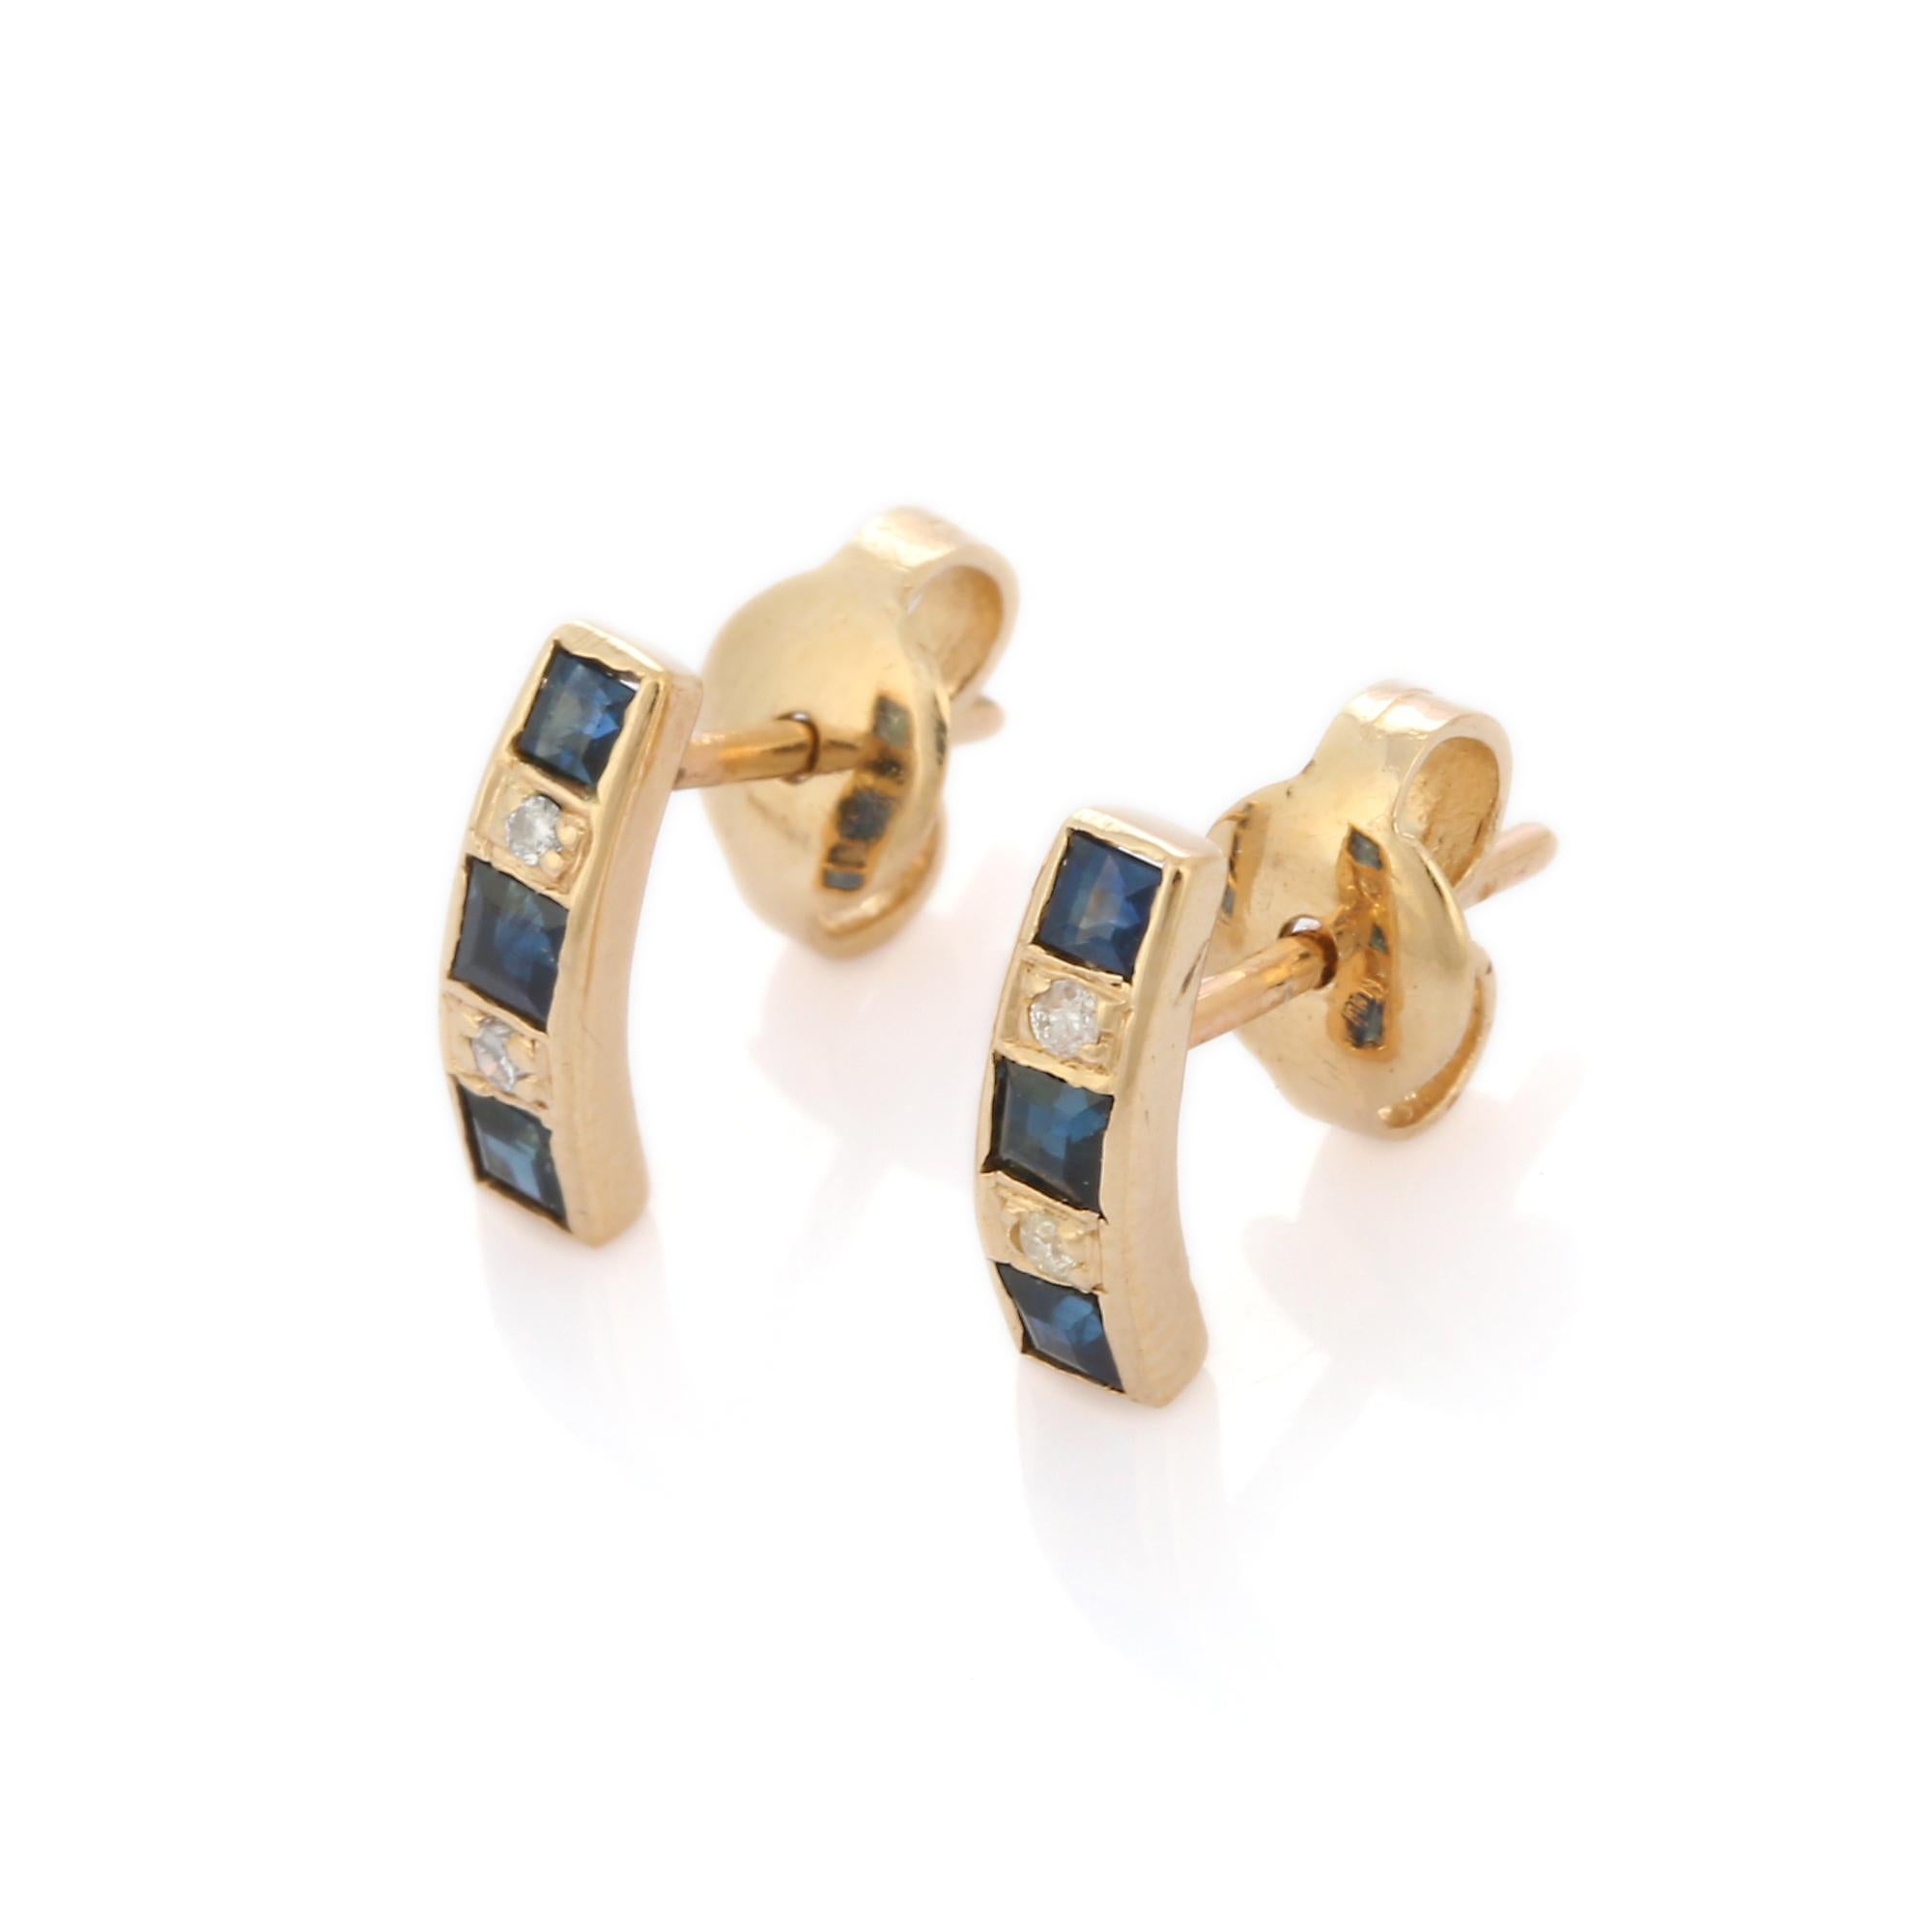 Studs create a subtle beauty while showcasing the colors of the natural precious gemstones and illuminating diamonds making a statement.

Square cut blue sapphire studs with diamonds in 18K gold. Embrace your look with these stunning pair of